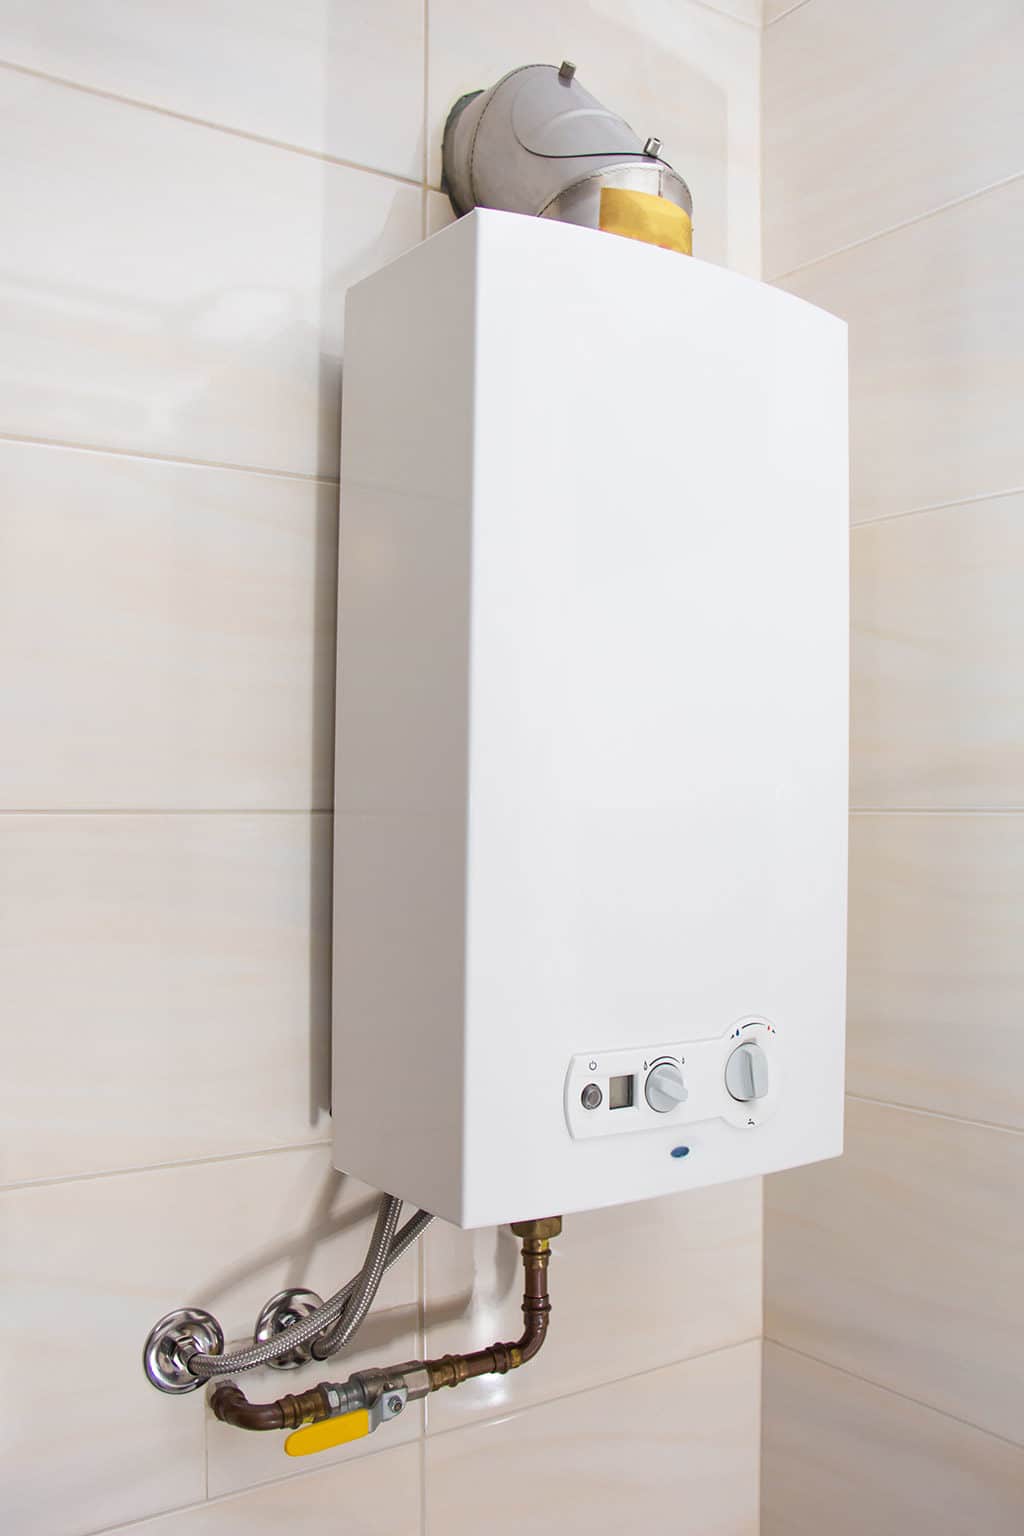 Reasons to get a tankless water heater in Myrtle Beach, SC